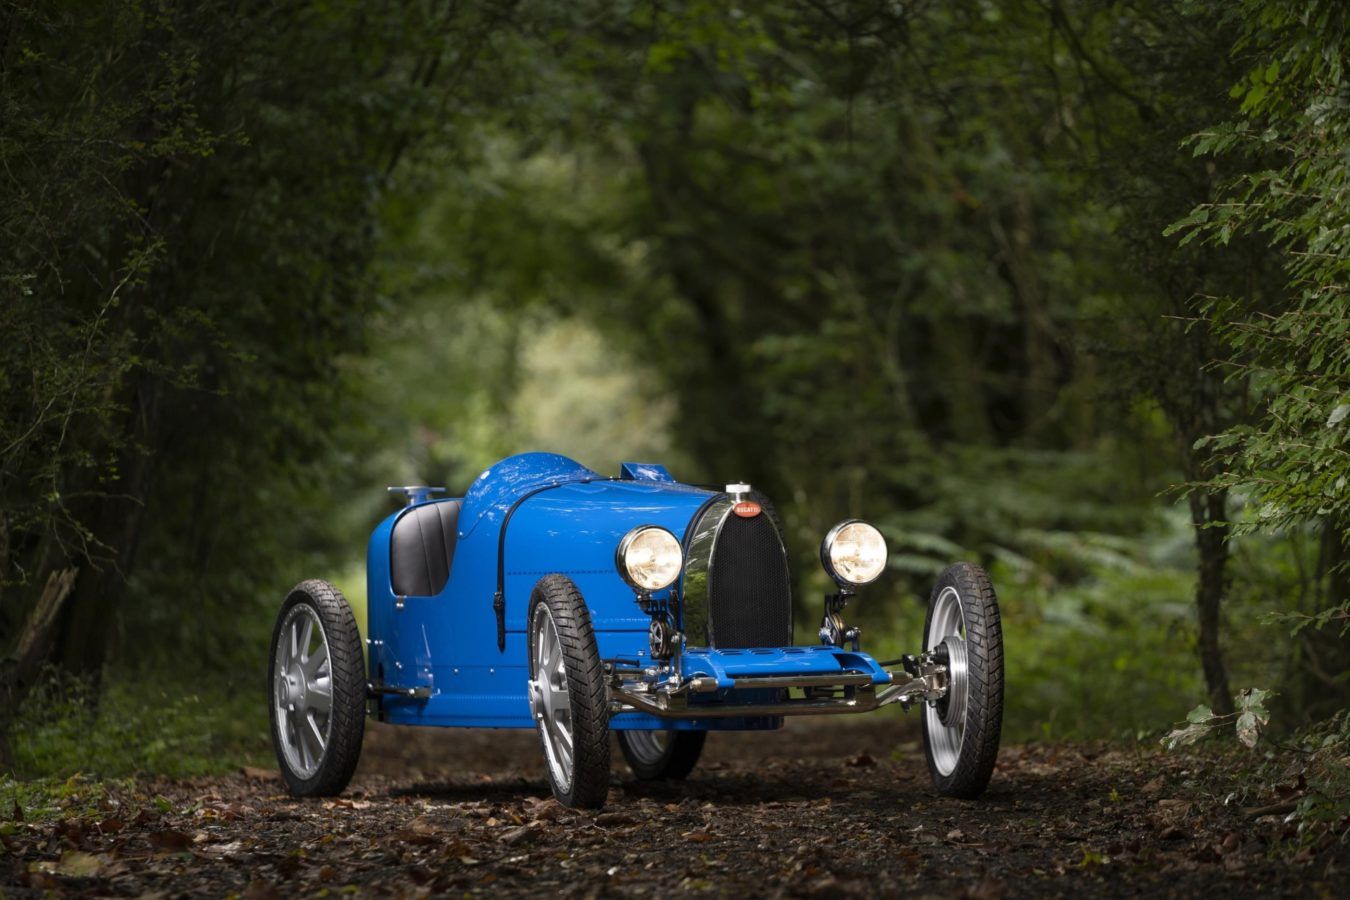 Bugatti introduces the Type 35 electric race car — for kids